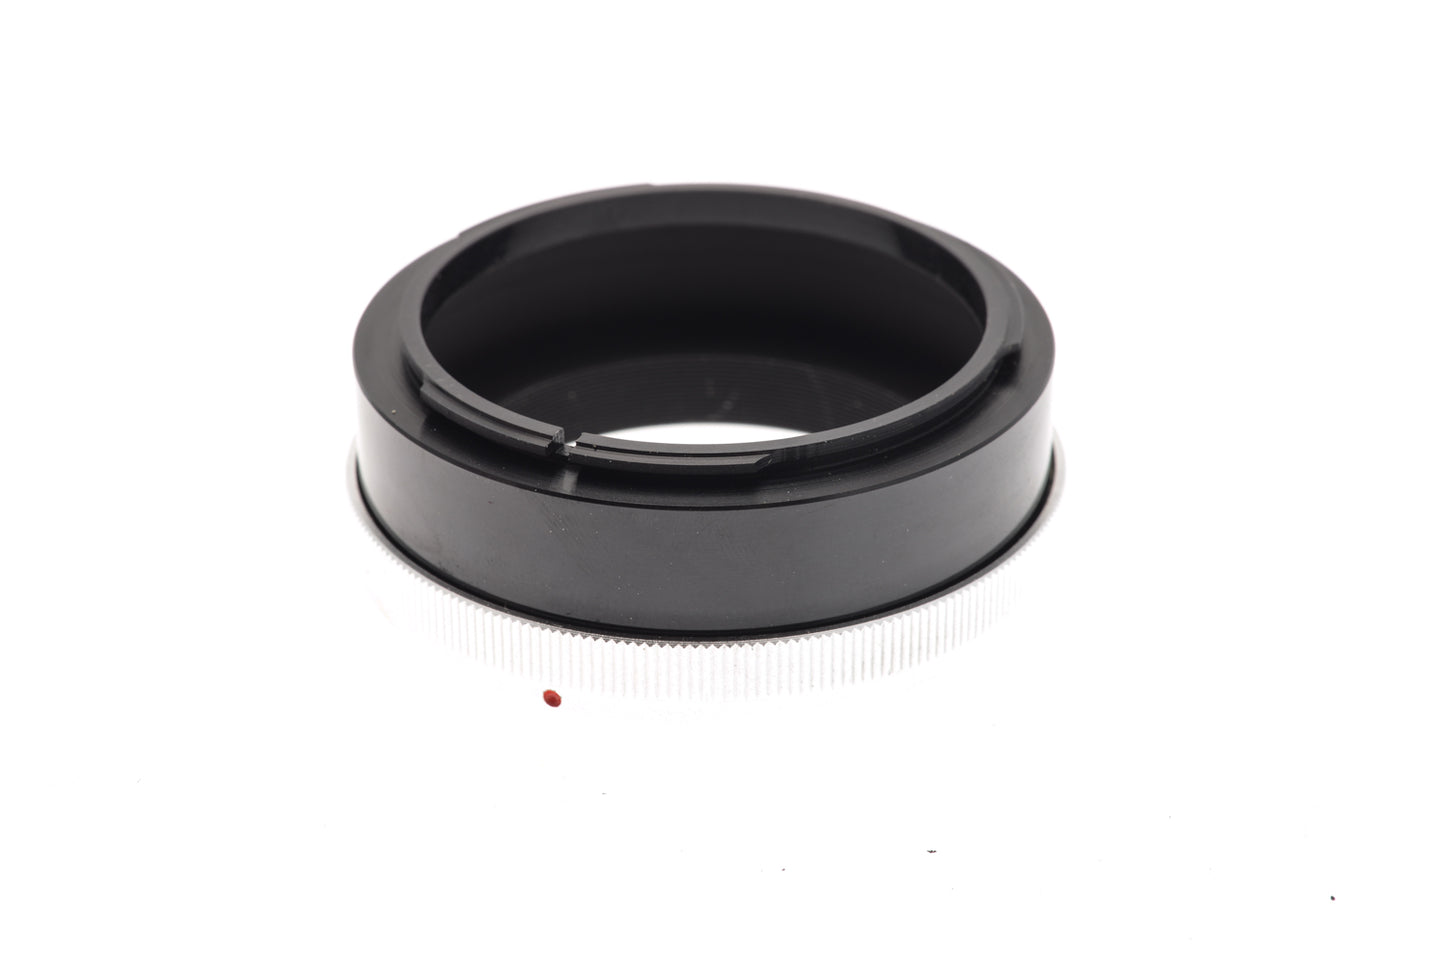 Canon M20 Extension Tube